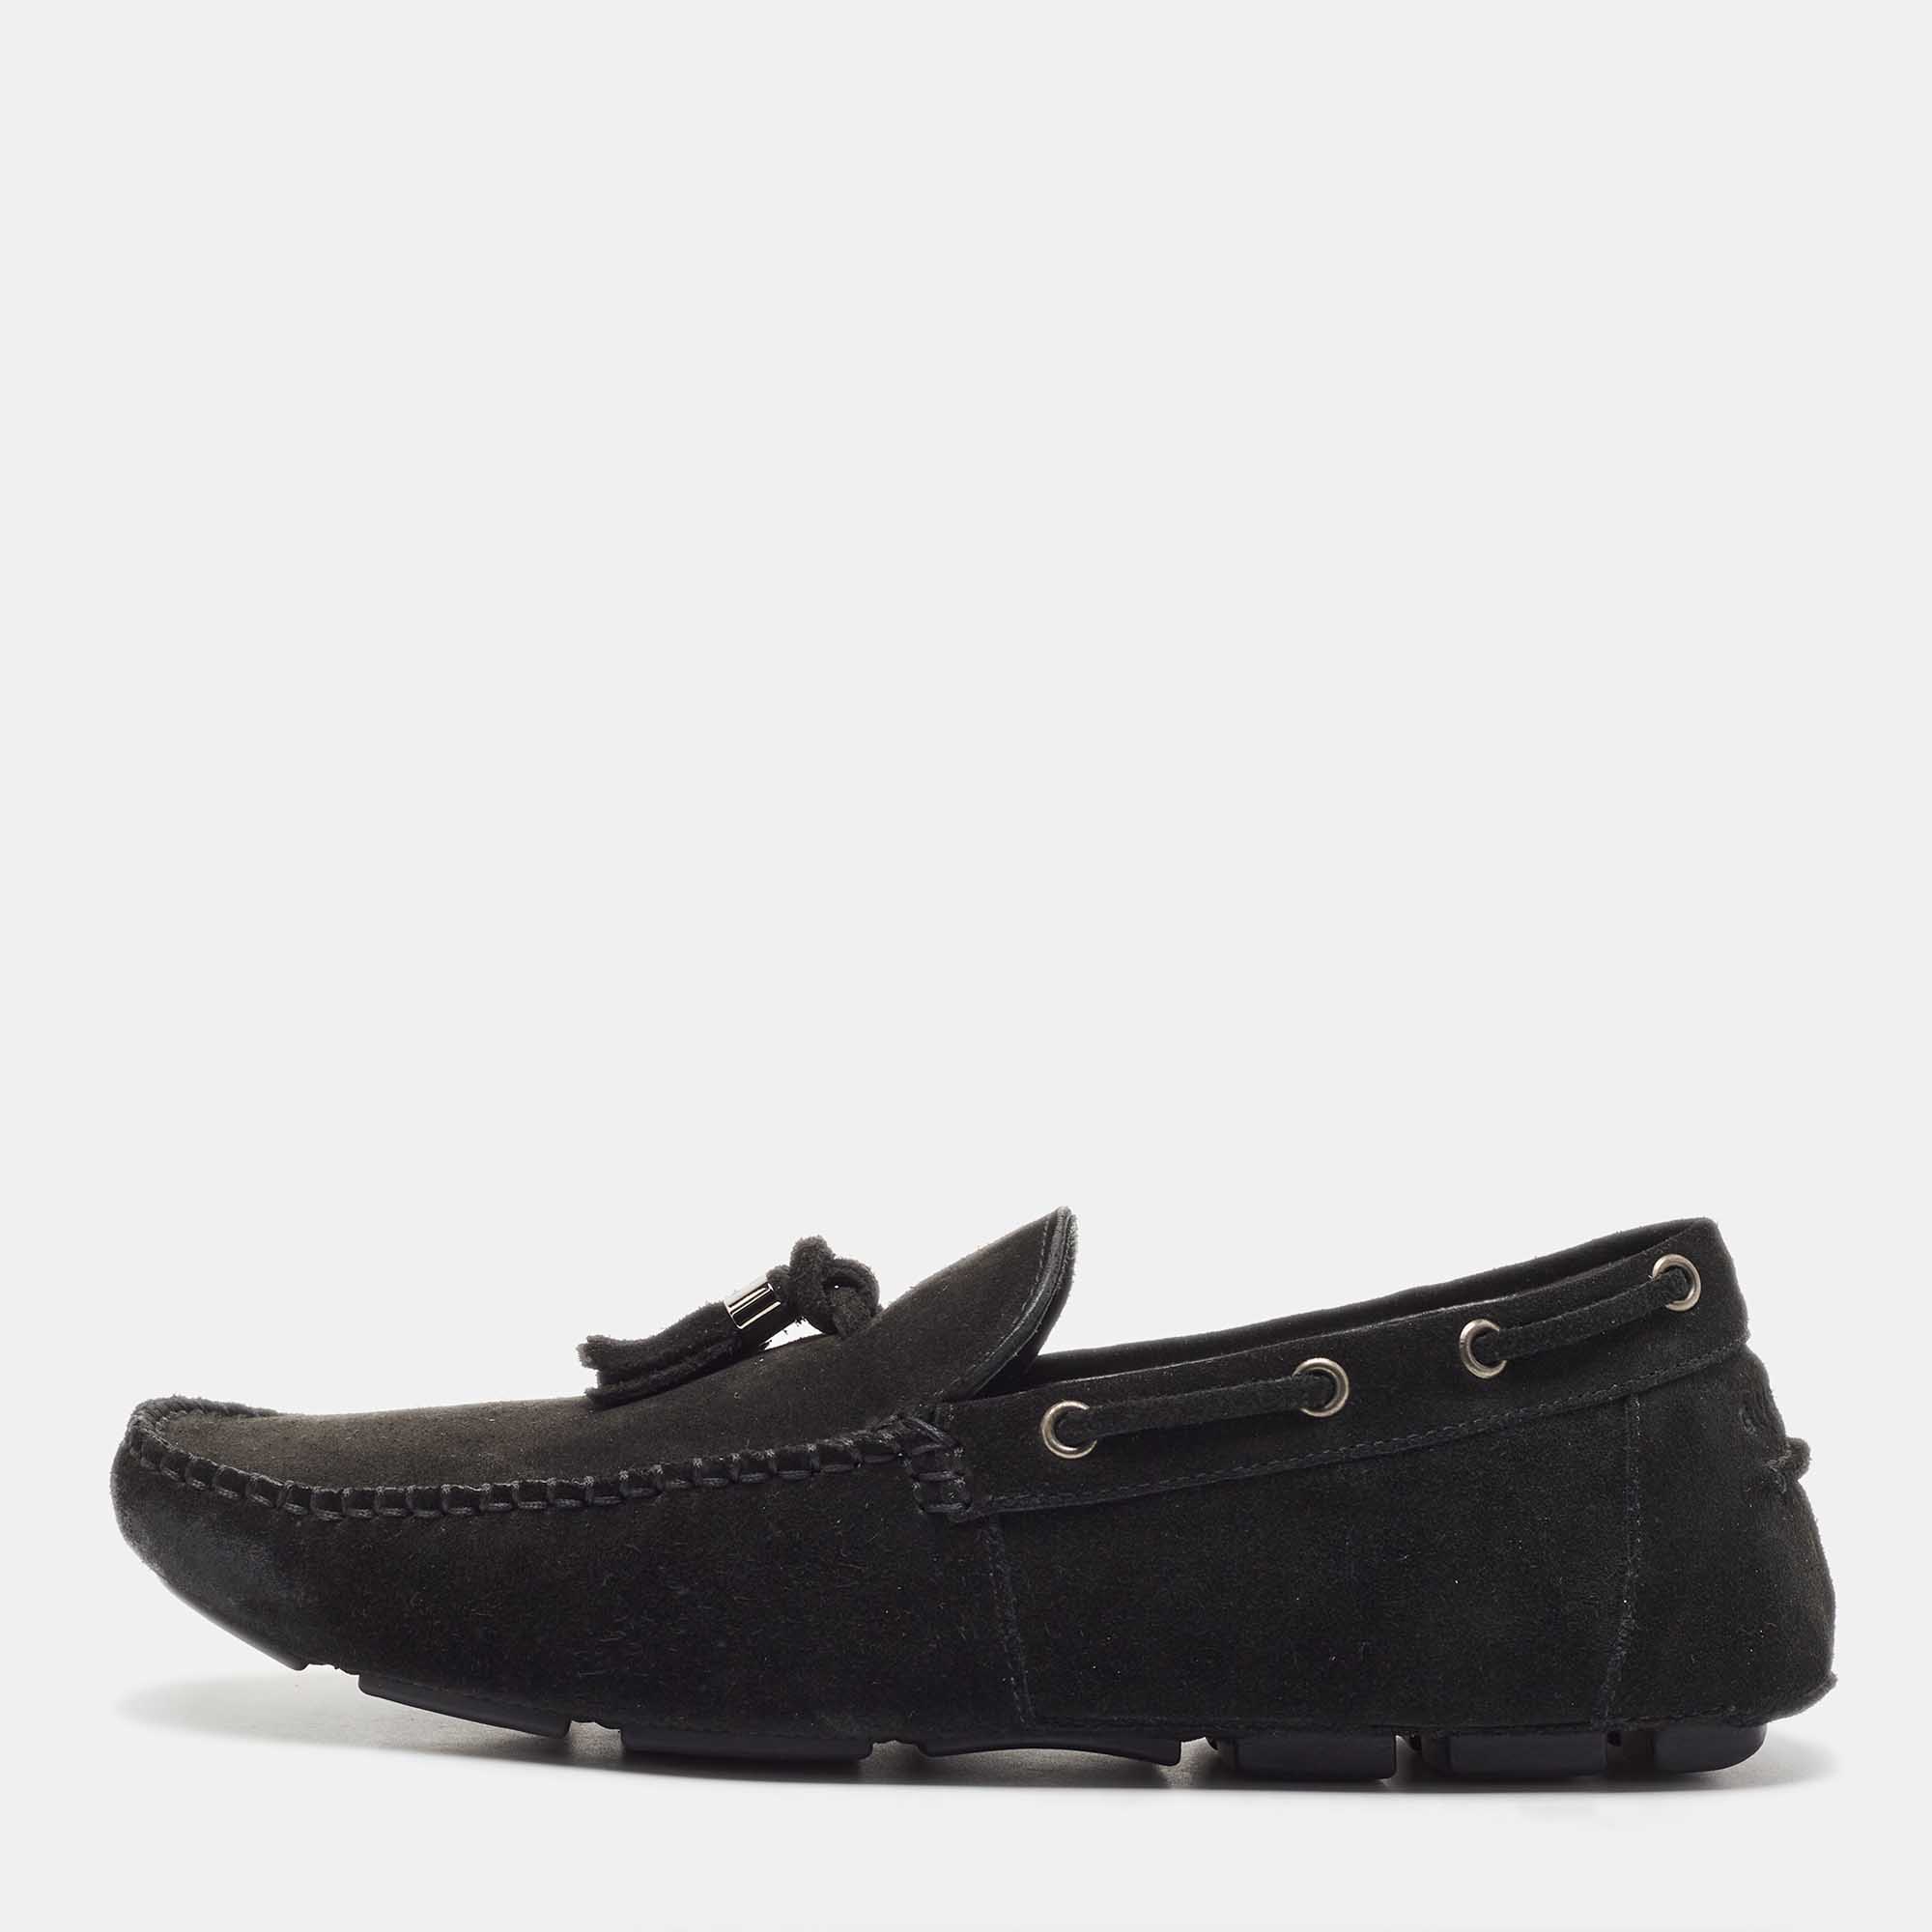 Pre-owned Givenchy Black Suede Tassel Detail Slip On Loafers Size 41